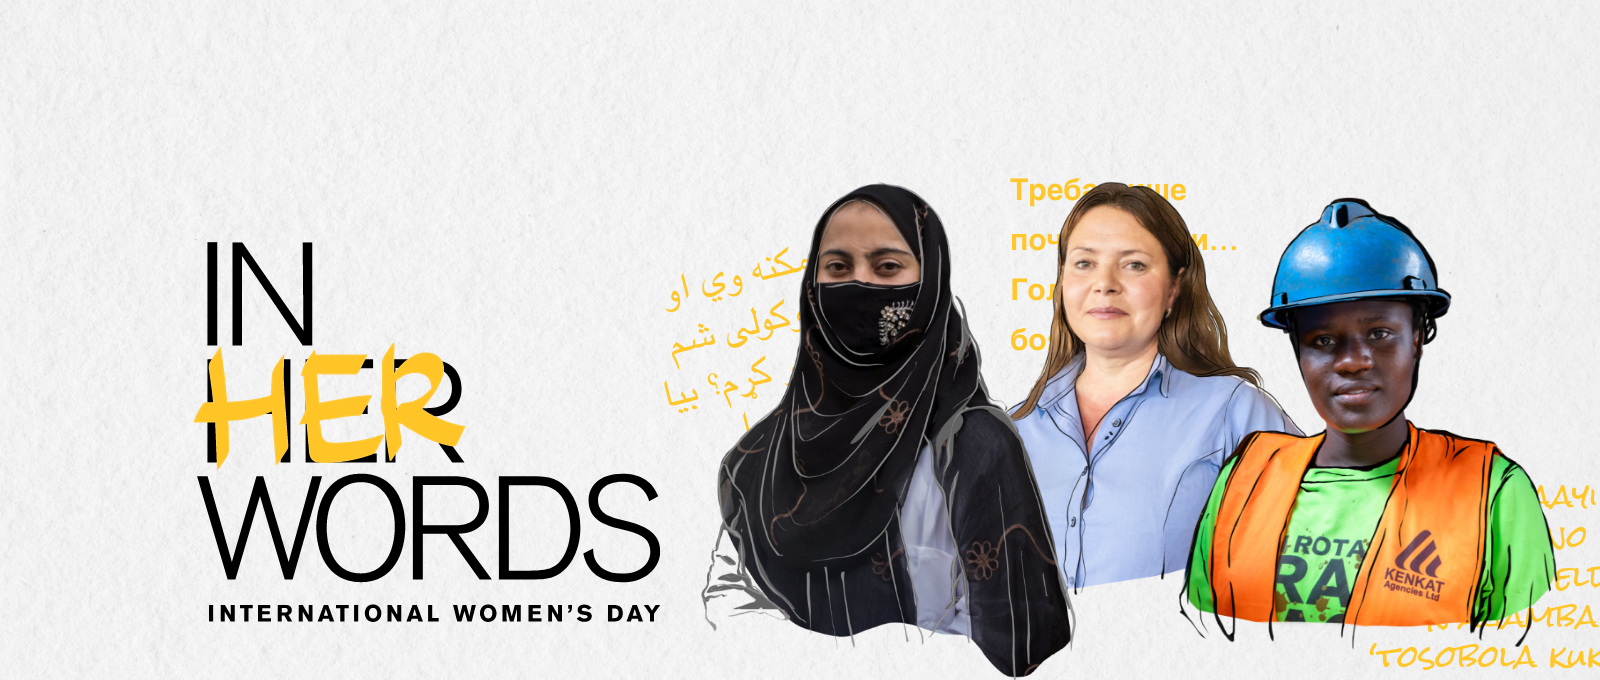 Image featuring three women with the title "in her words"